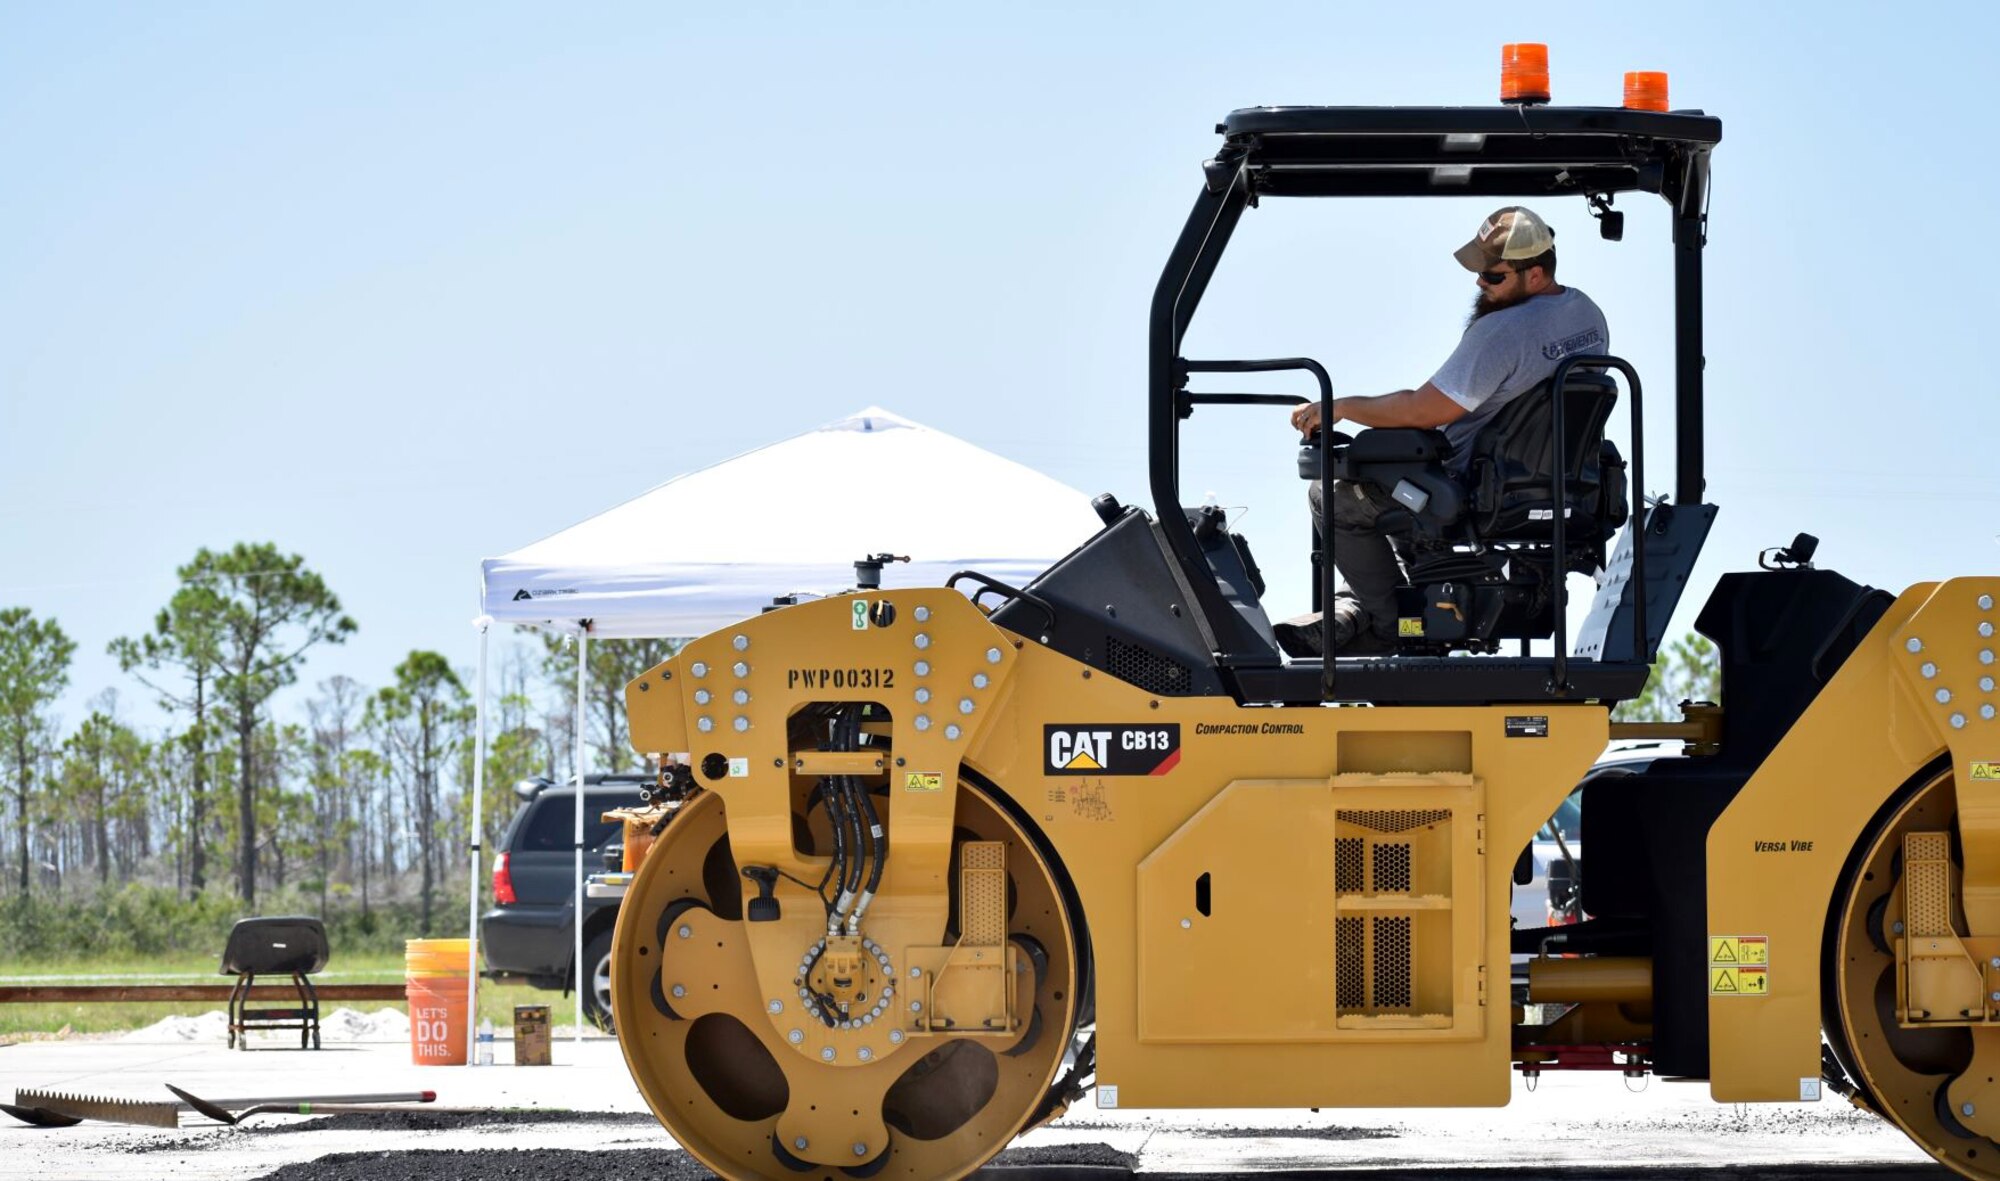 As part of the final phase off capping a crater, the pavements team with the Air Force Civil Engineer Center uses a steel drum compactor at the backfill event on July 16, 2019 at the 9700 Area at Tyndall Air Force Base, Florida. (U.S. Air Force photo by Grace Bland)